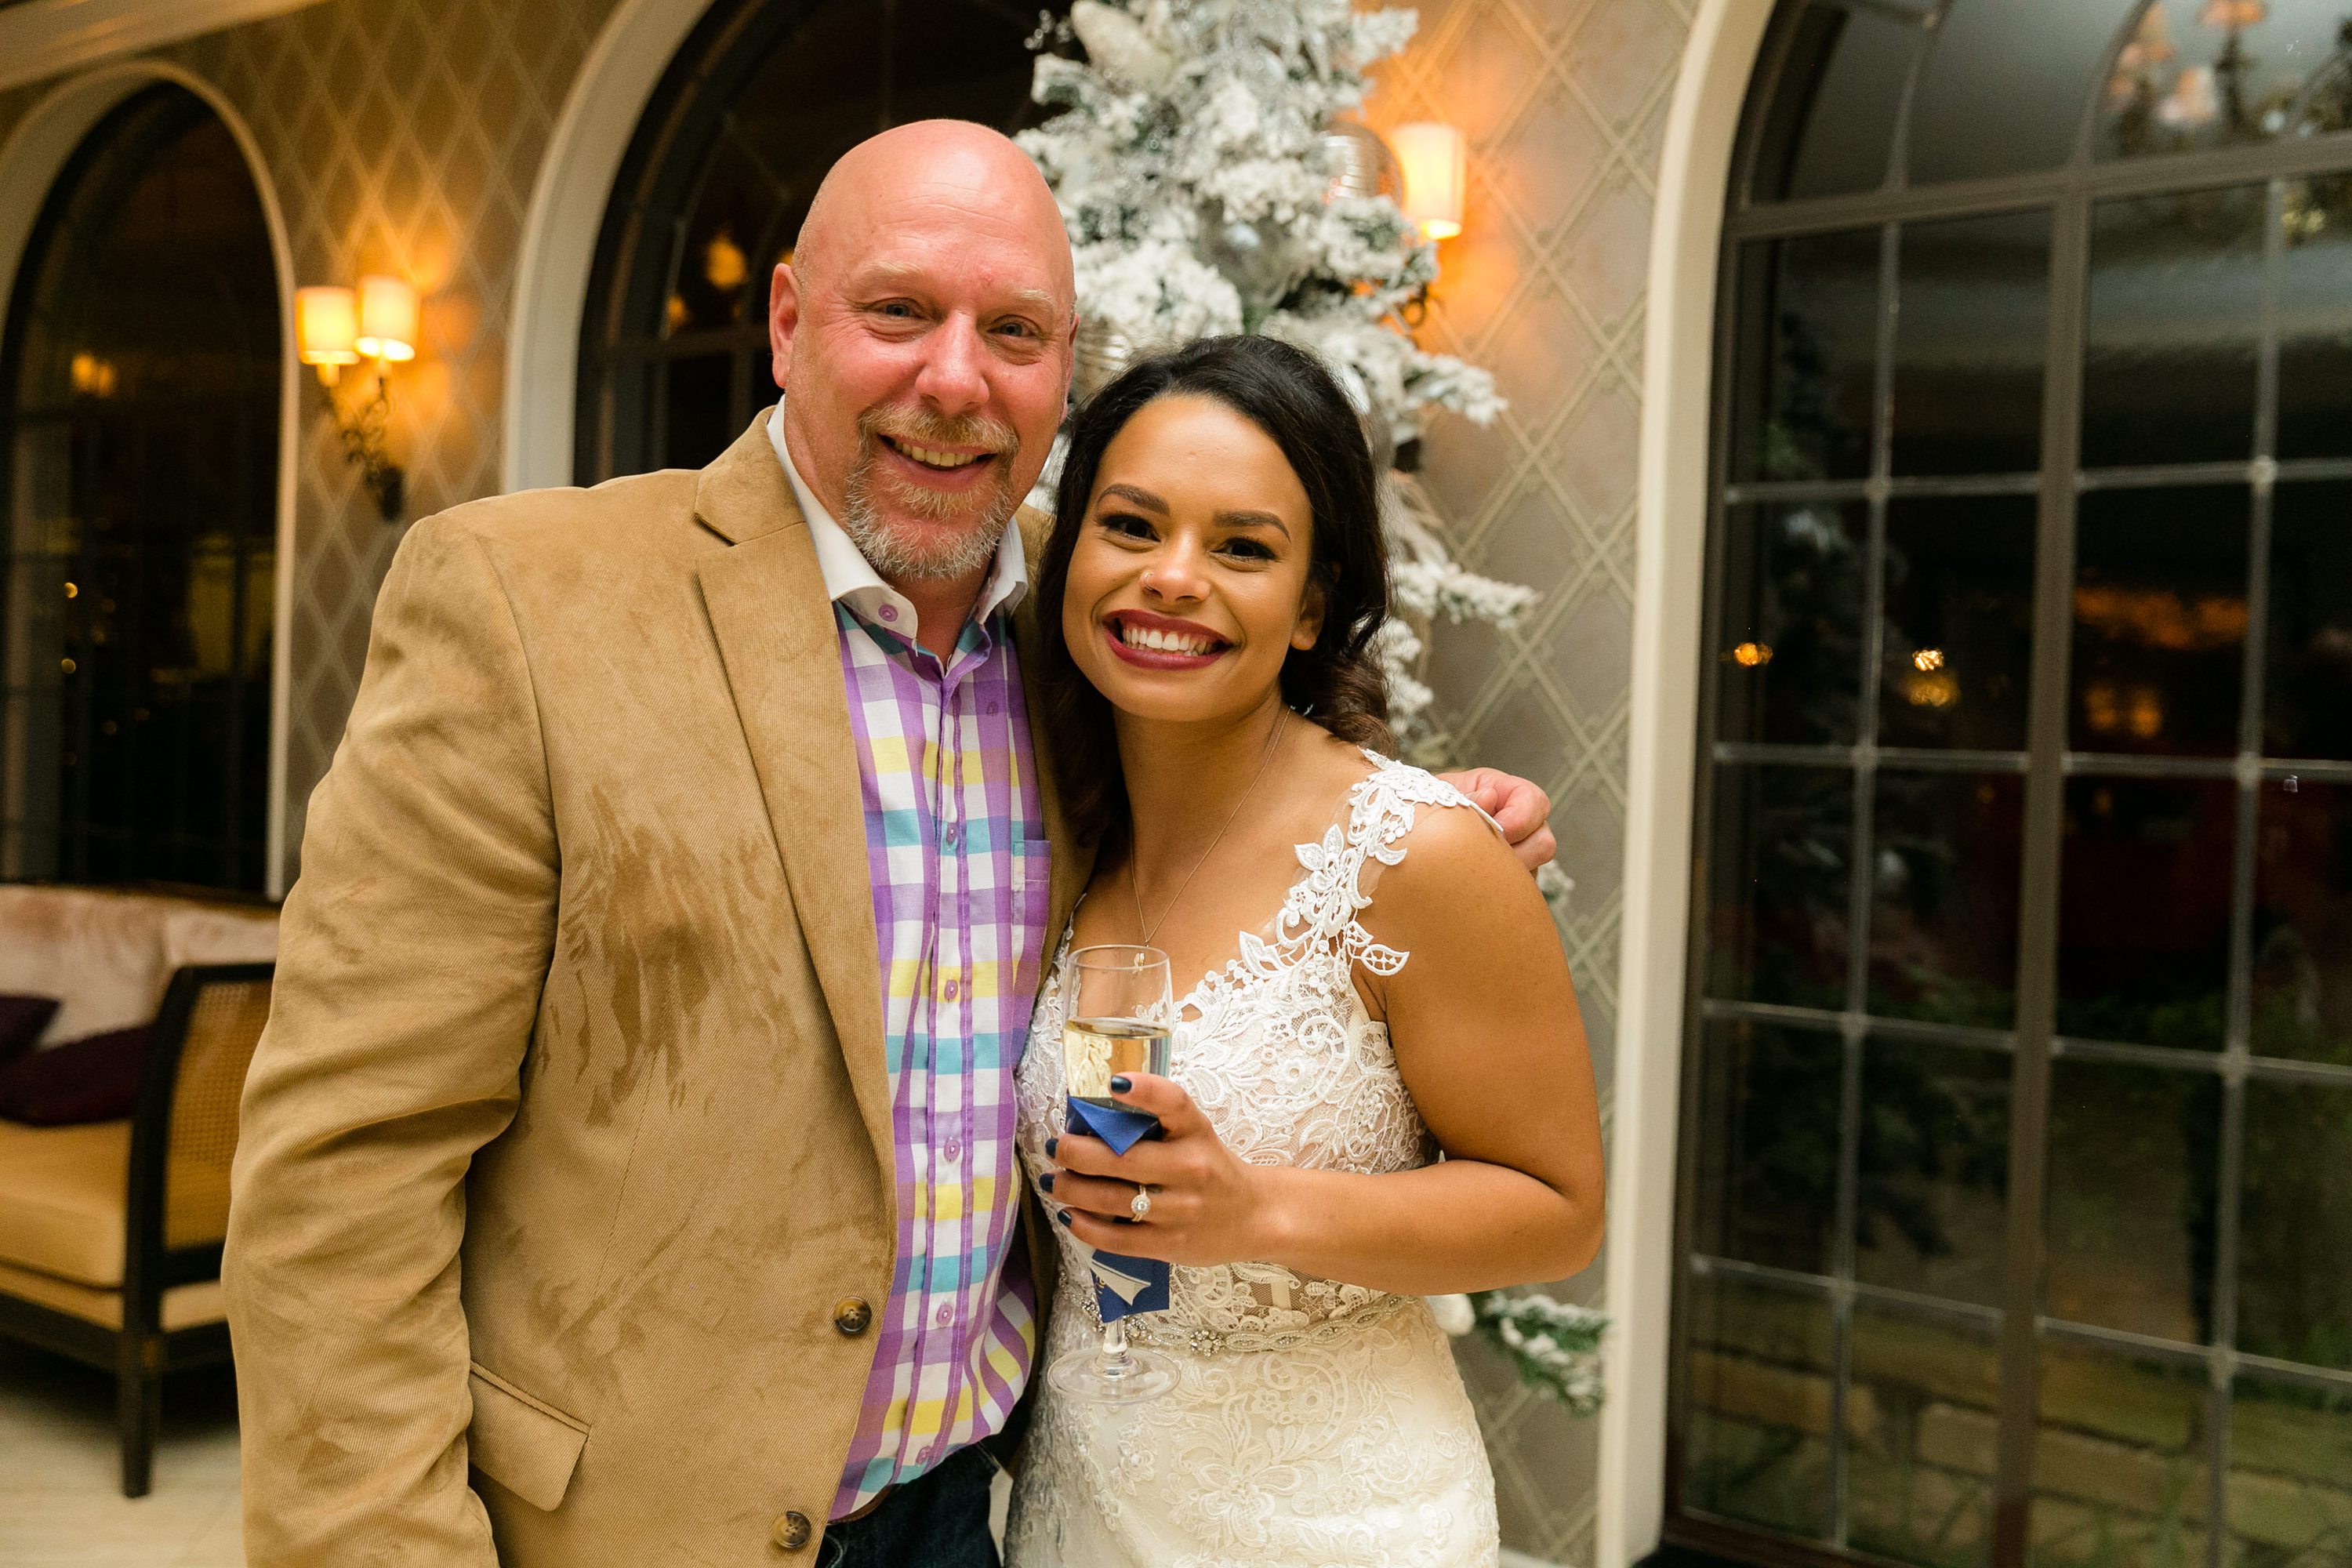  december wedding, Darian and Holland's wedding at the Rosewood Mansion in Dallas